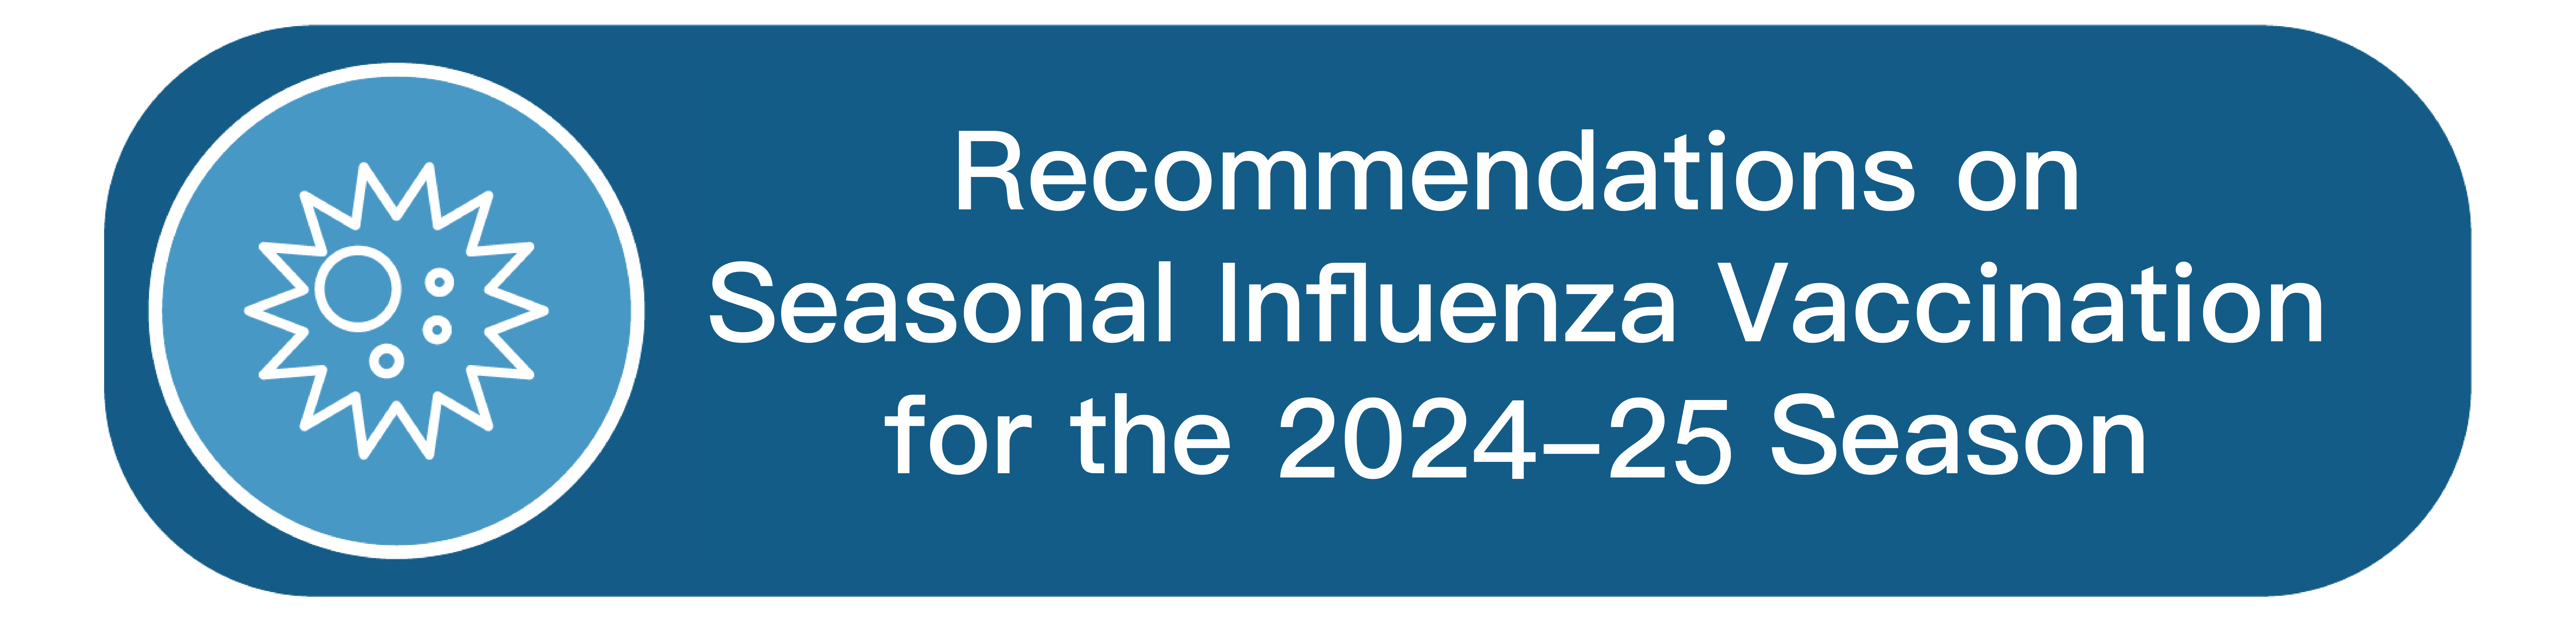 Recommendations on Seasonal Influenza Vaccination for the 2024-25 Season